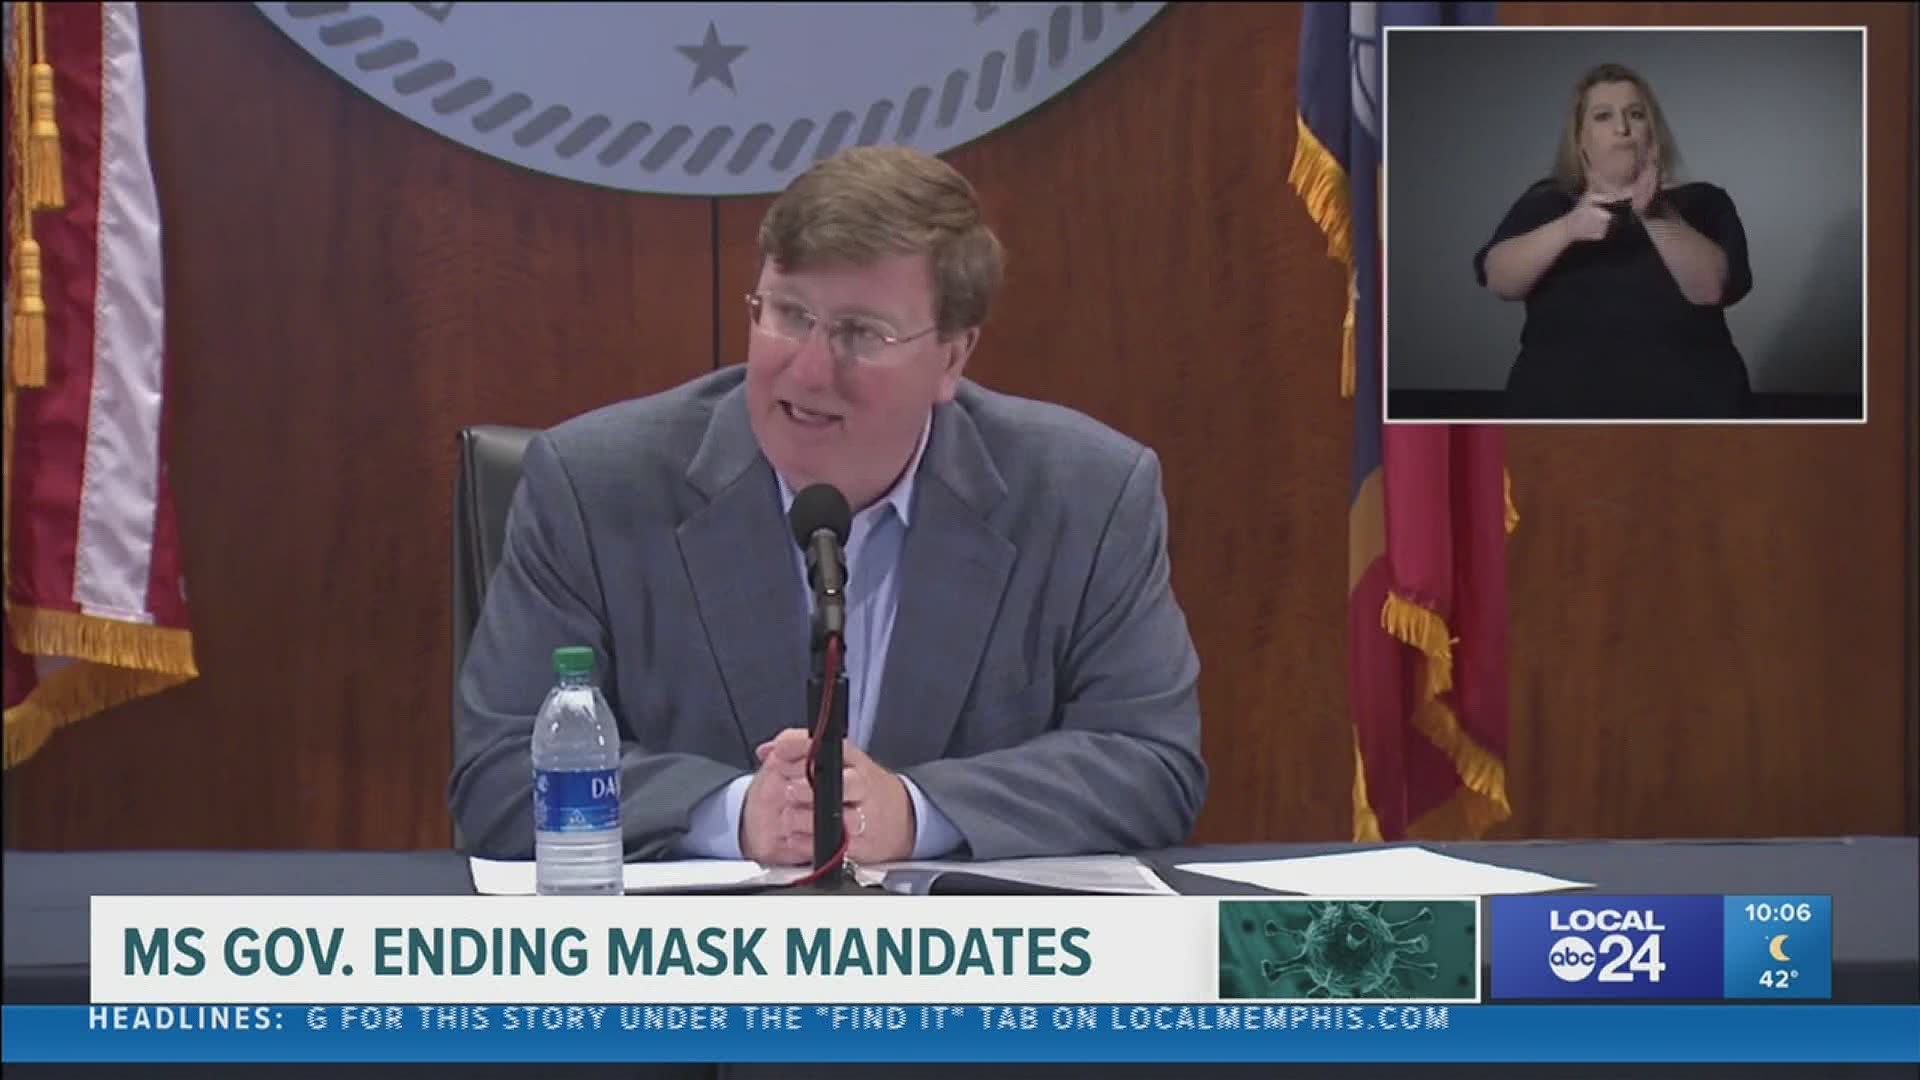 Reeves said there are still "recommendations" for all to continue to follow guidance.